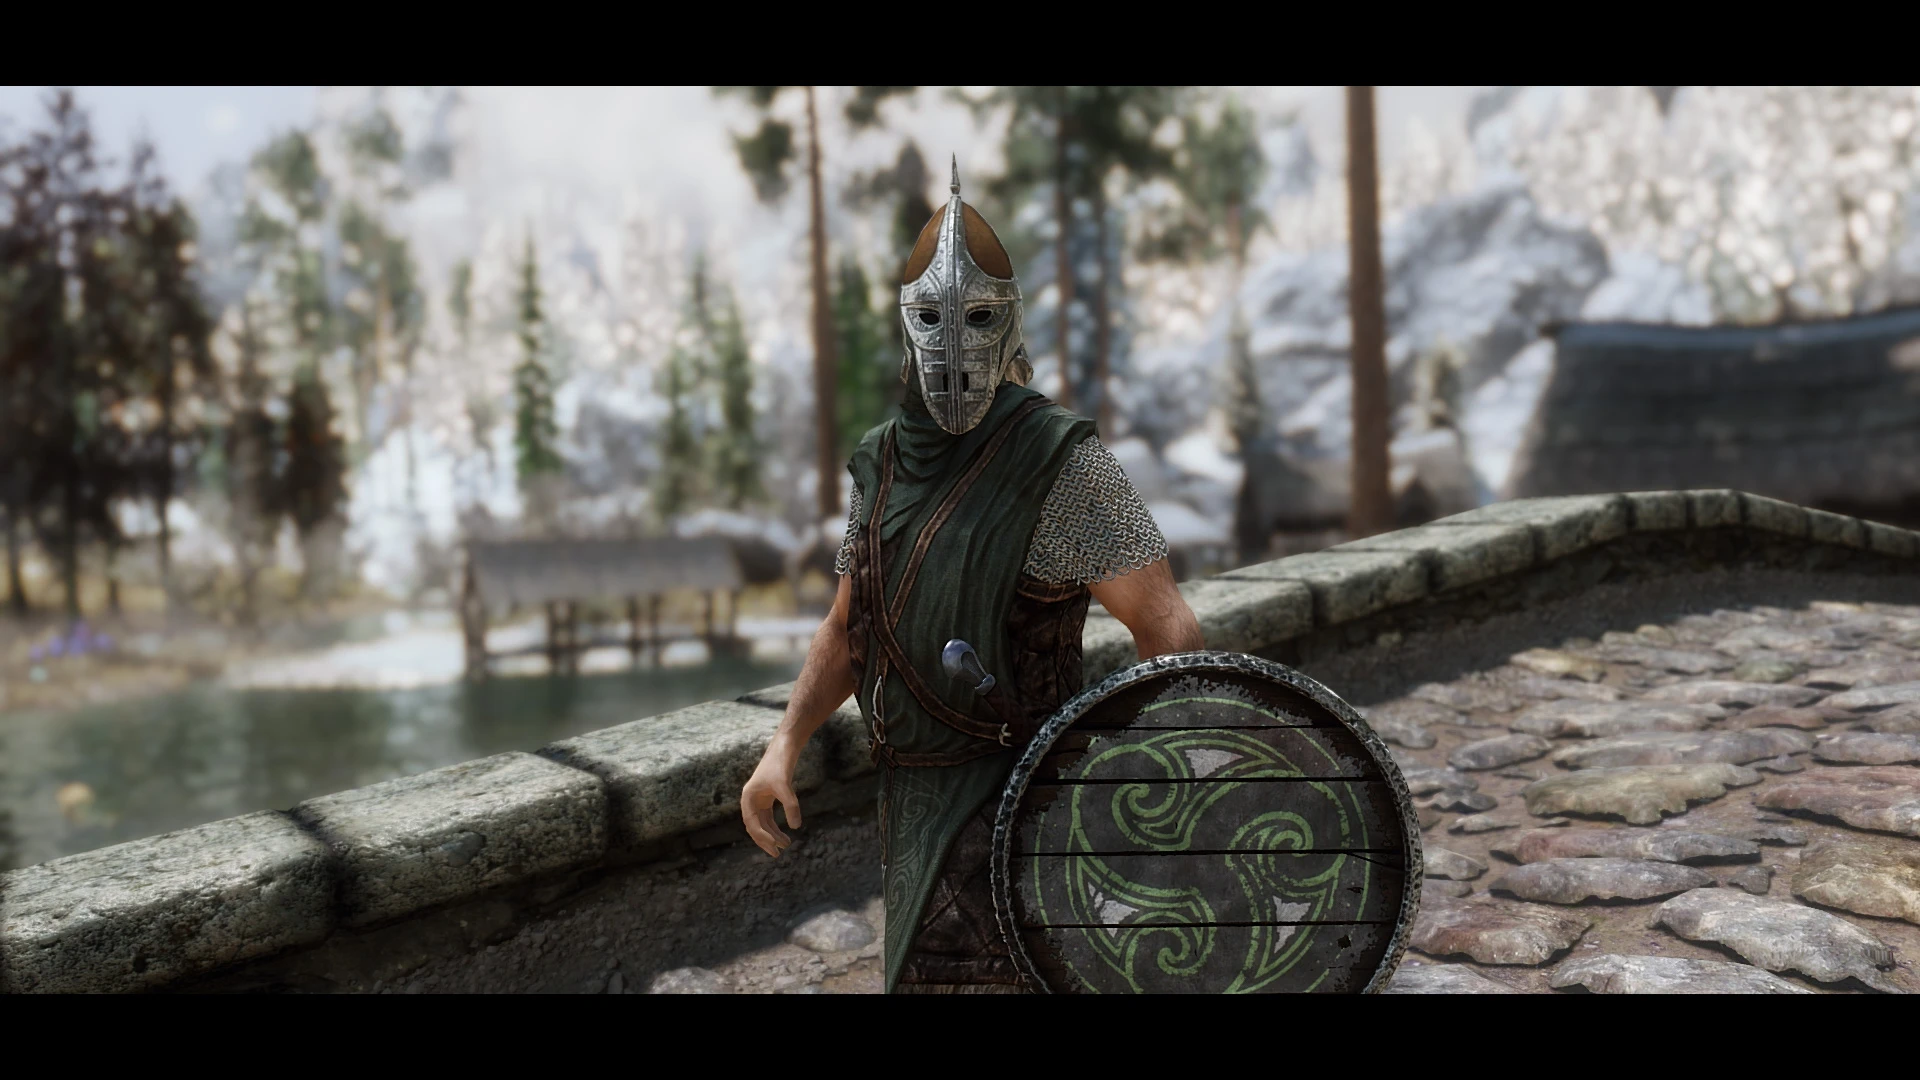 rudy enb with aequinoctium weathers at skyrim special edition nexus.